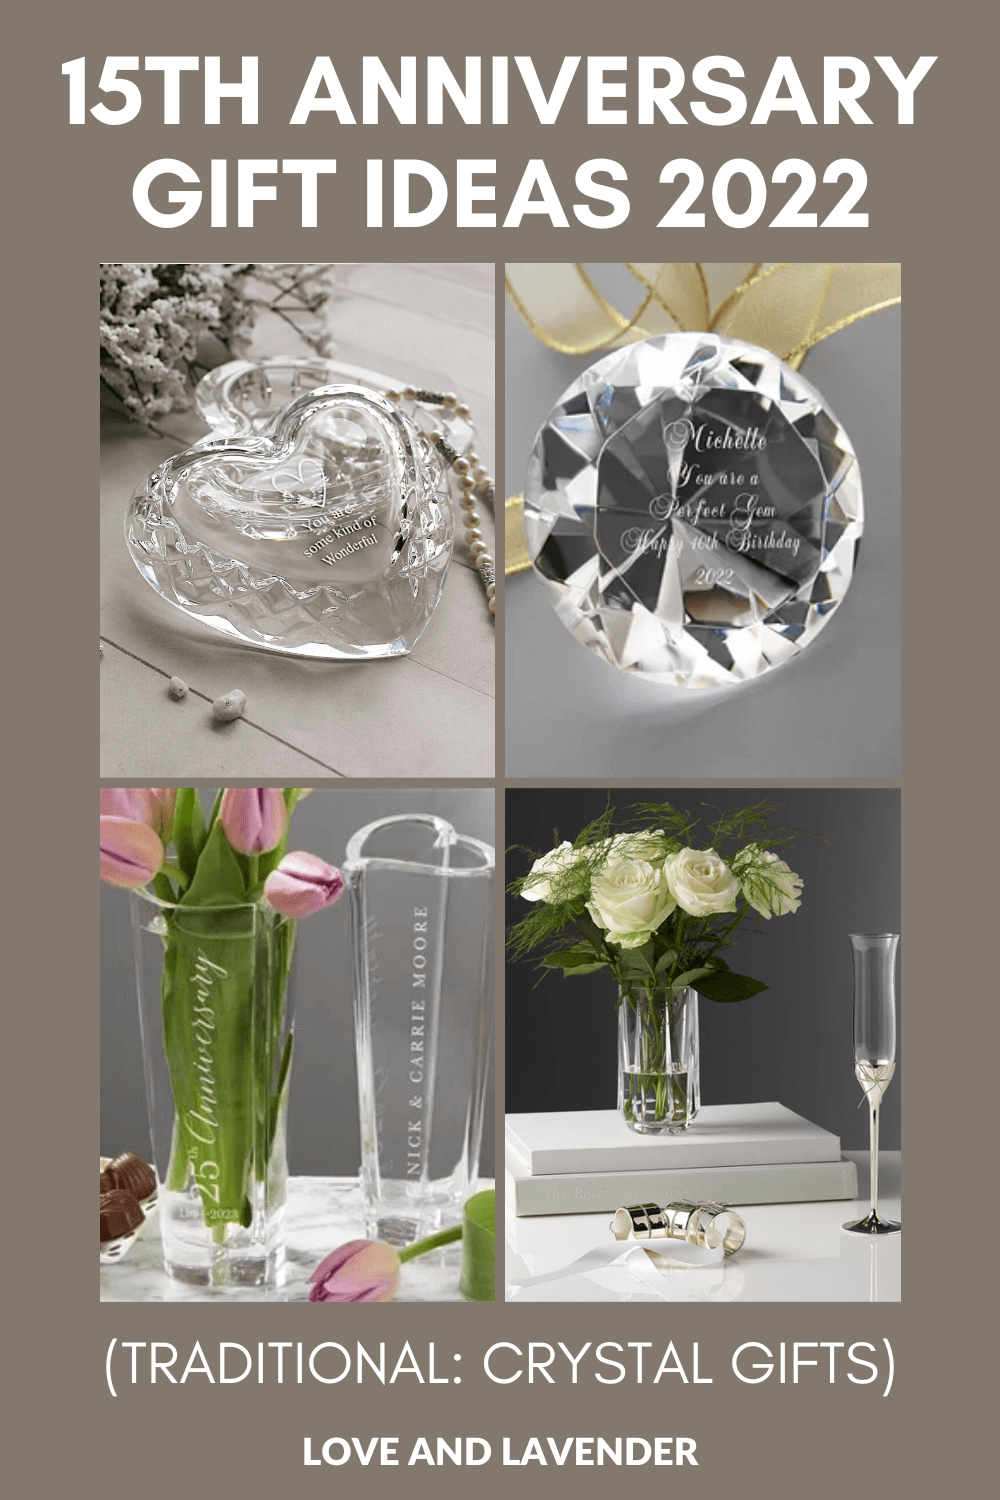 33 Crystal Gifts That Sparkle for a 15th Year Anniversary!